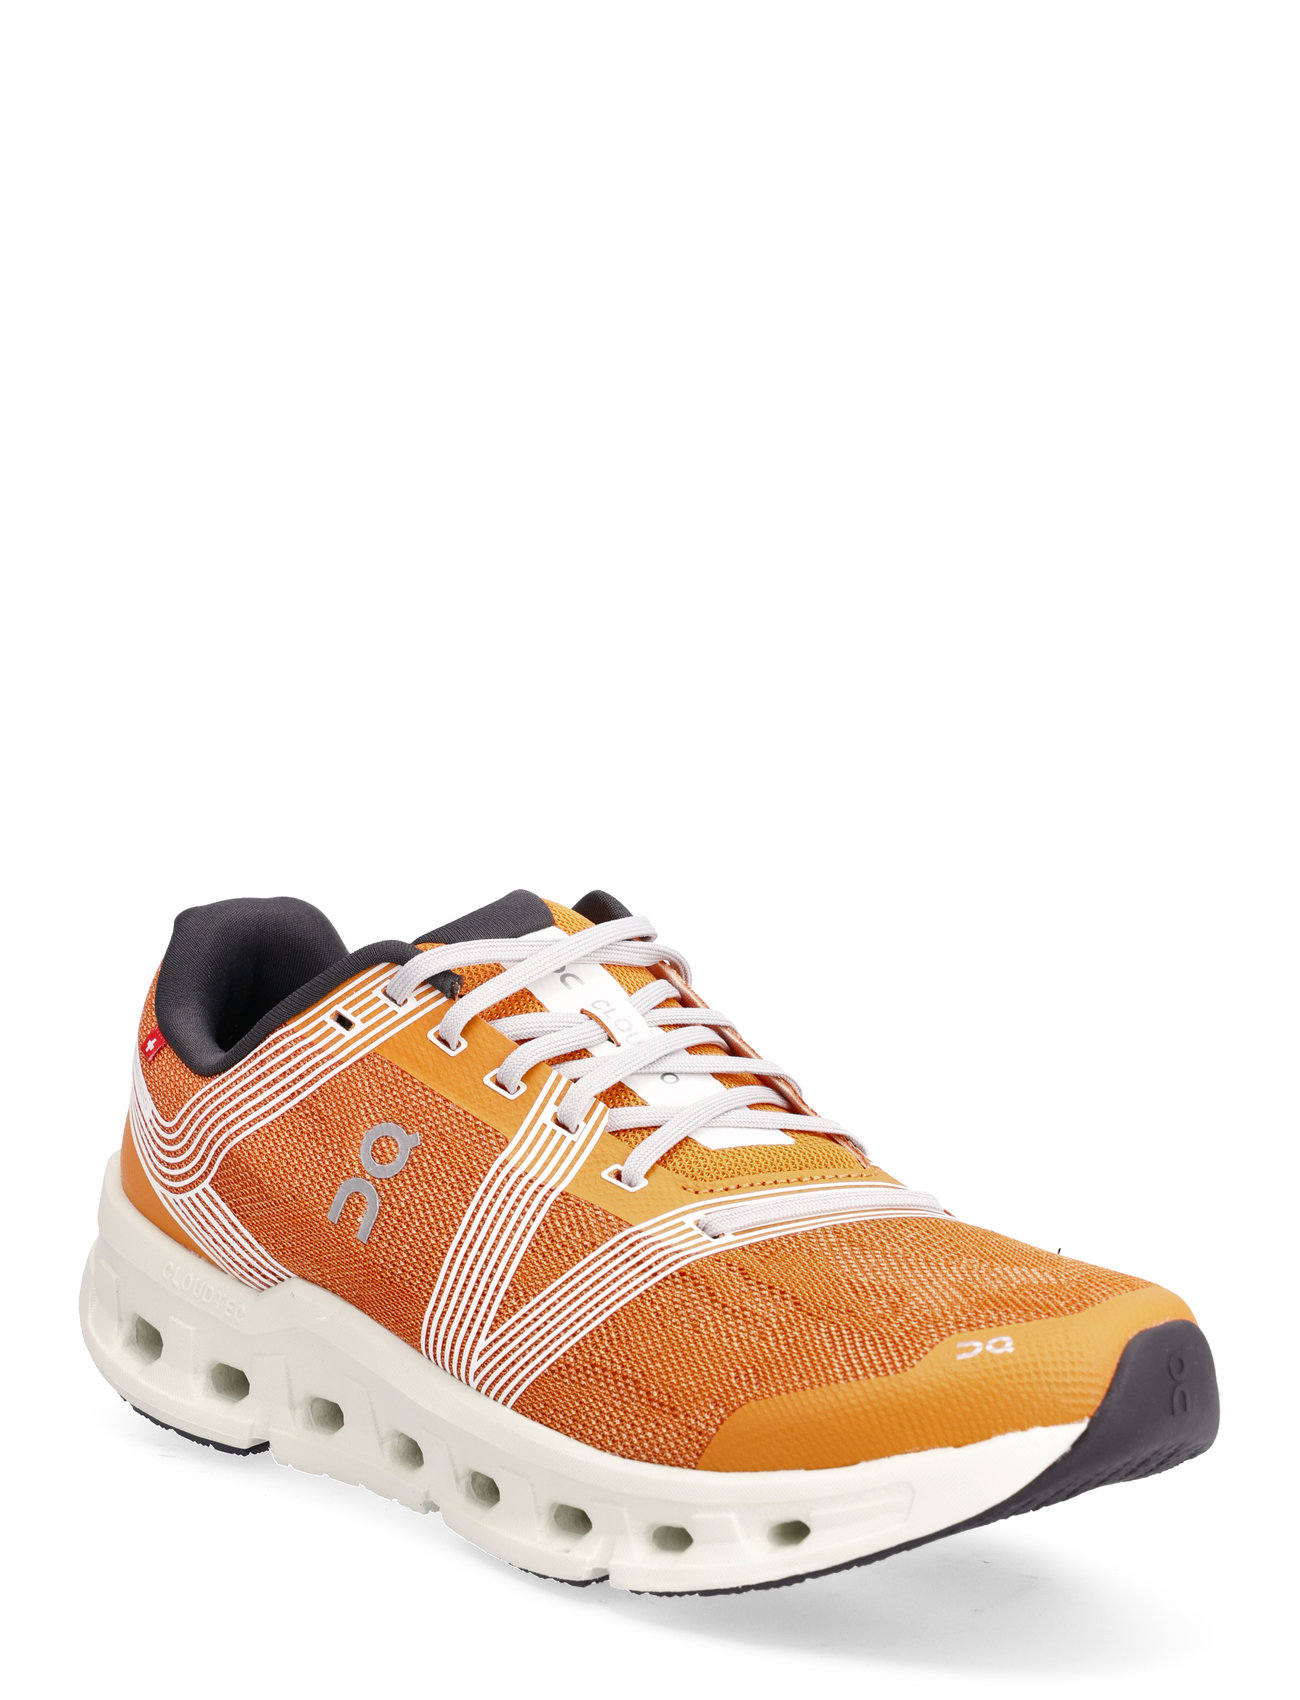 Cloudgo Shoes Sport Shoes Running Shoes Multi/mönstrad On